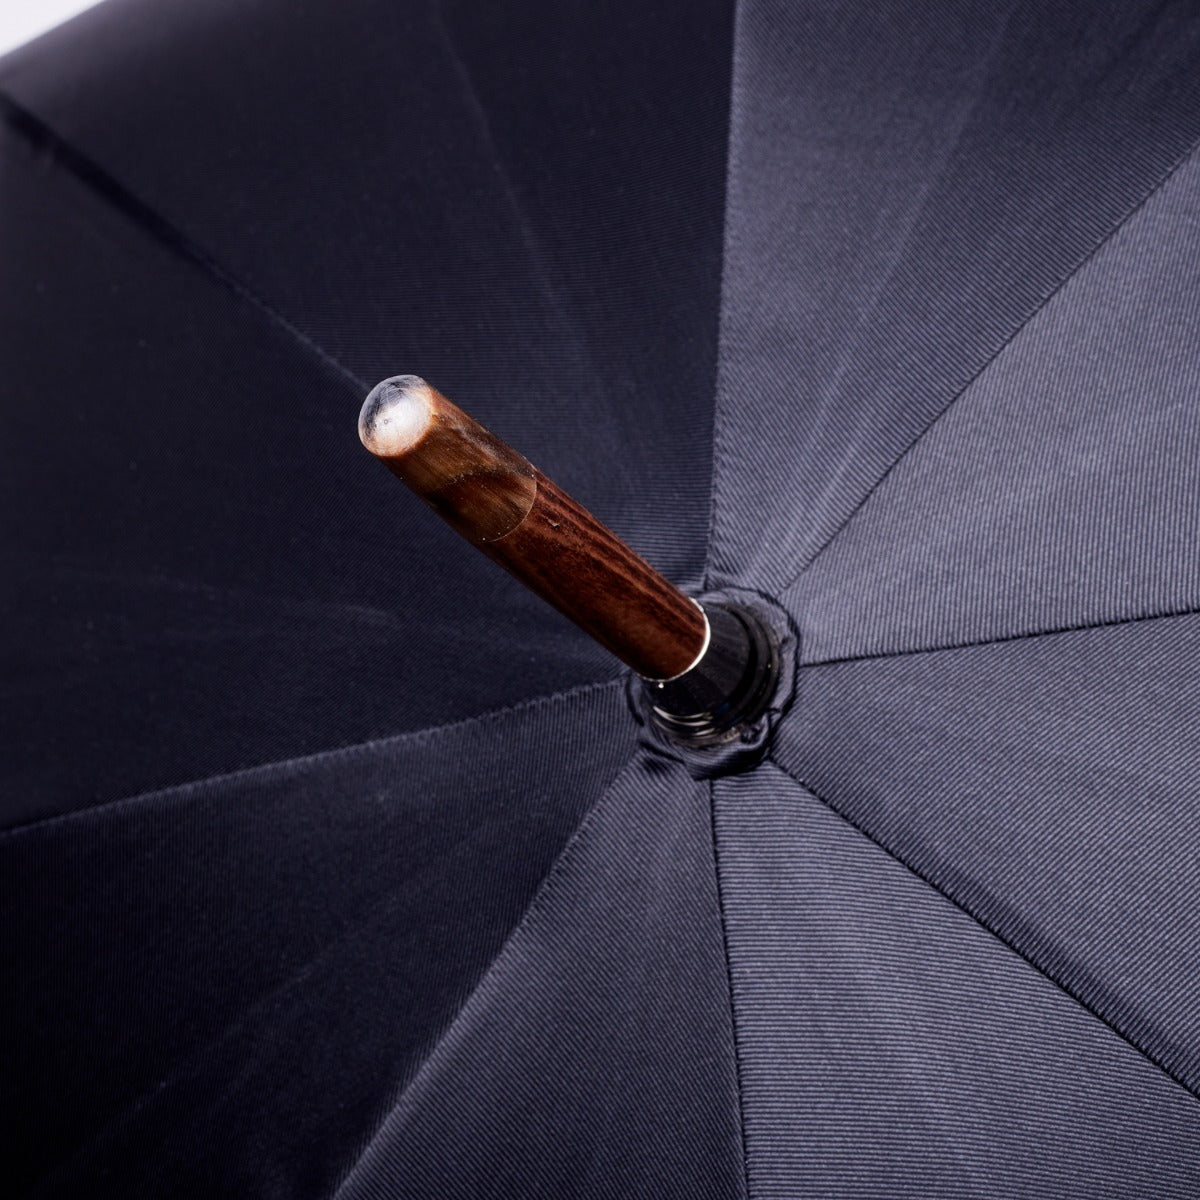 A KirbyAllison.com Black Alligator Solid Stick with Black Canopy umbrella with a wooden handle and polyester canopy.